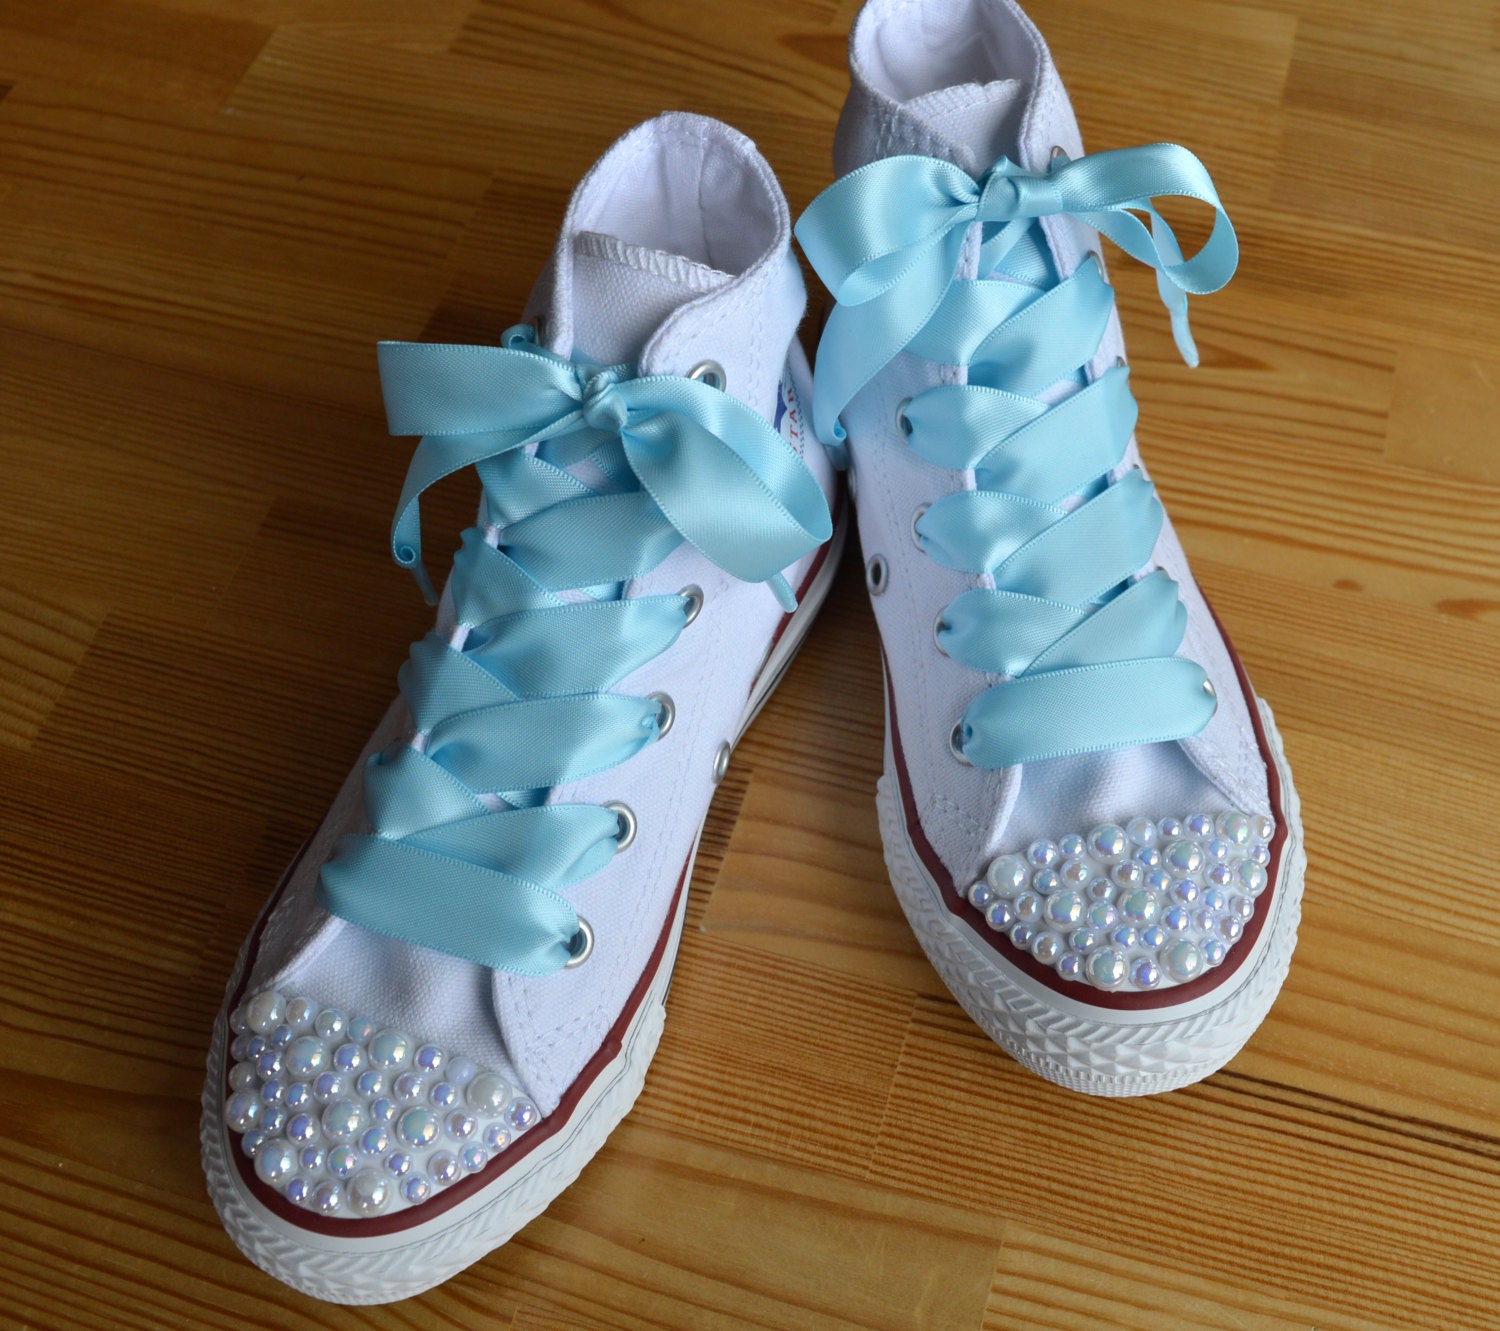 Custom Converse shoes with white Pearls and blue satin ribbon | Etsy